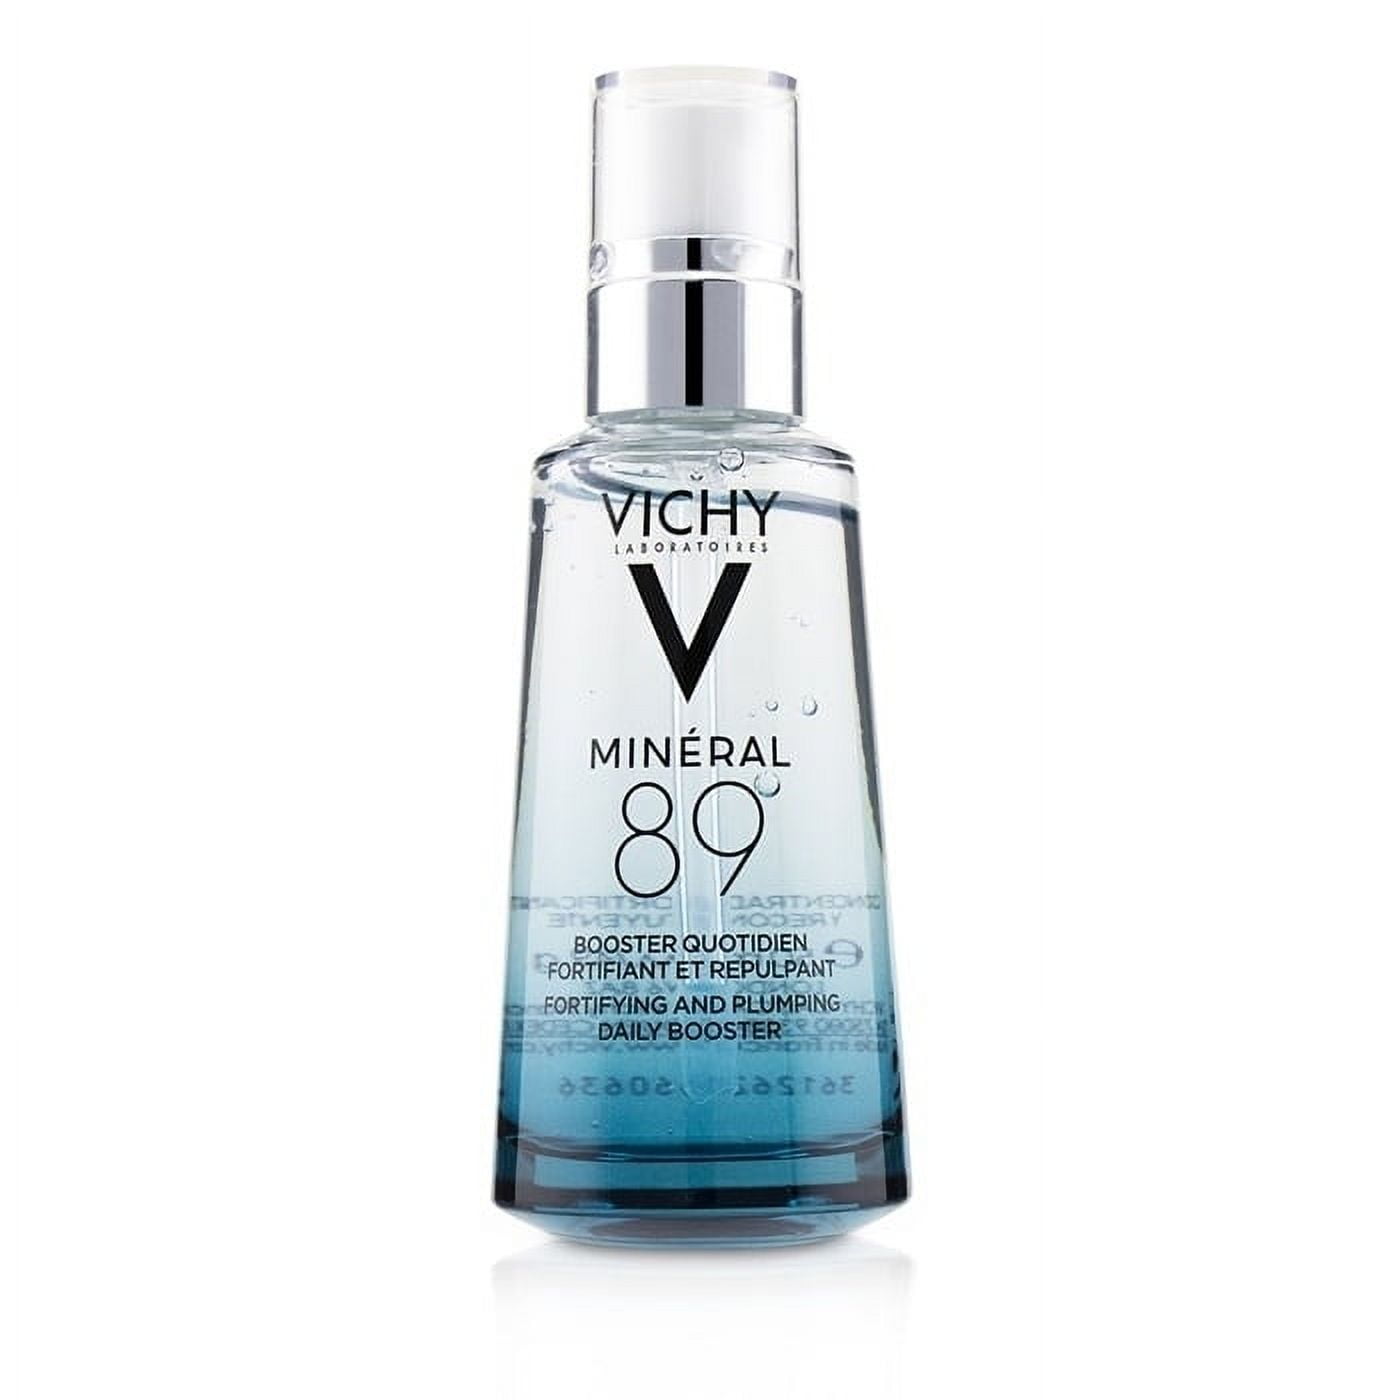 Mineral 89 Fortifying & Plumping Daily Booster